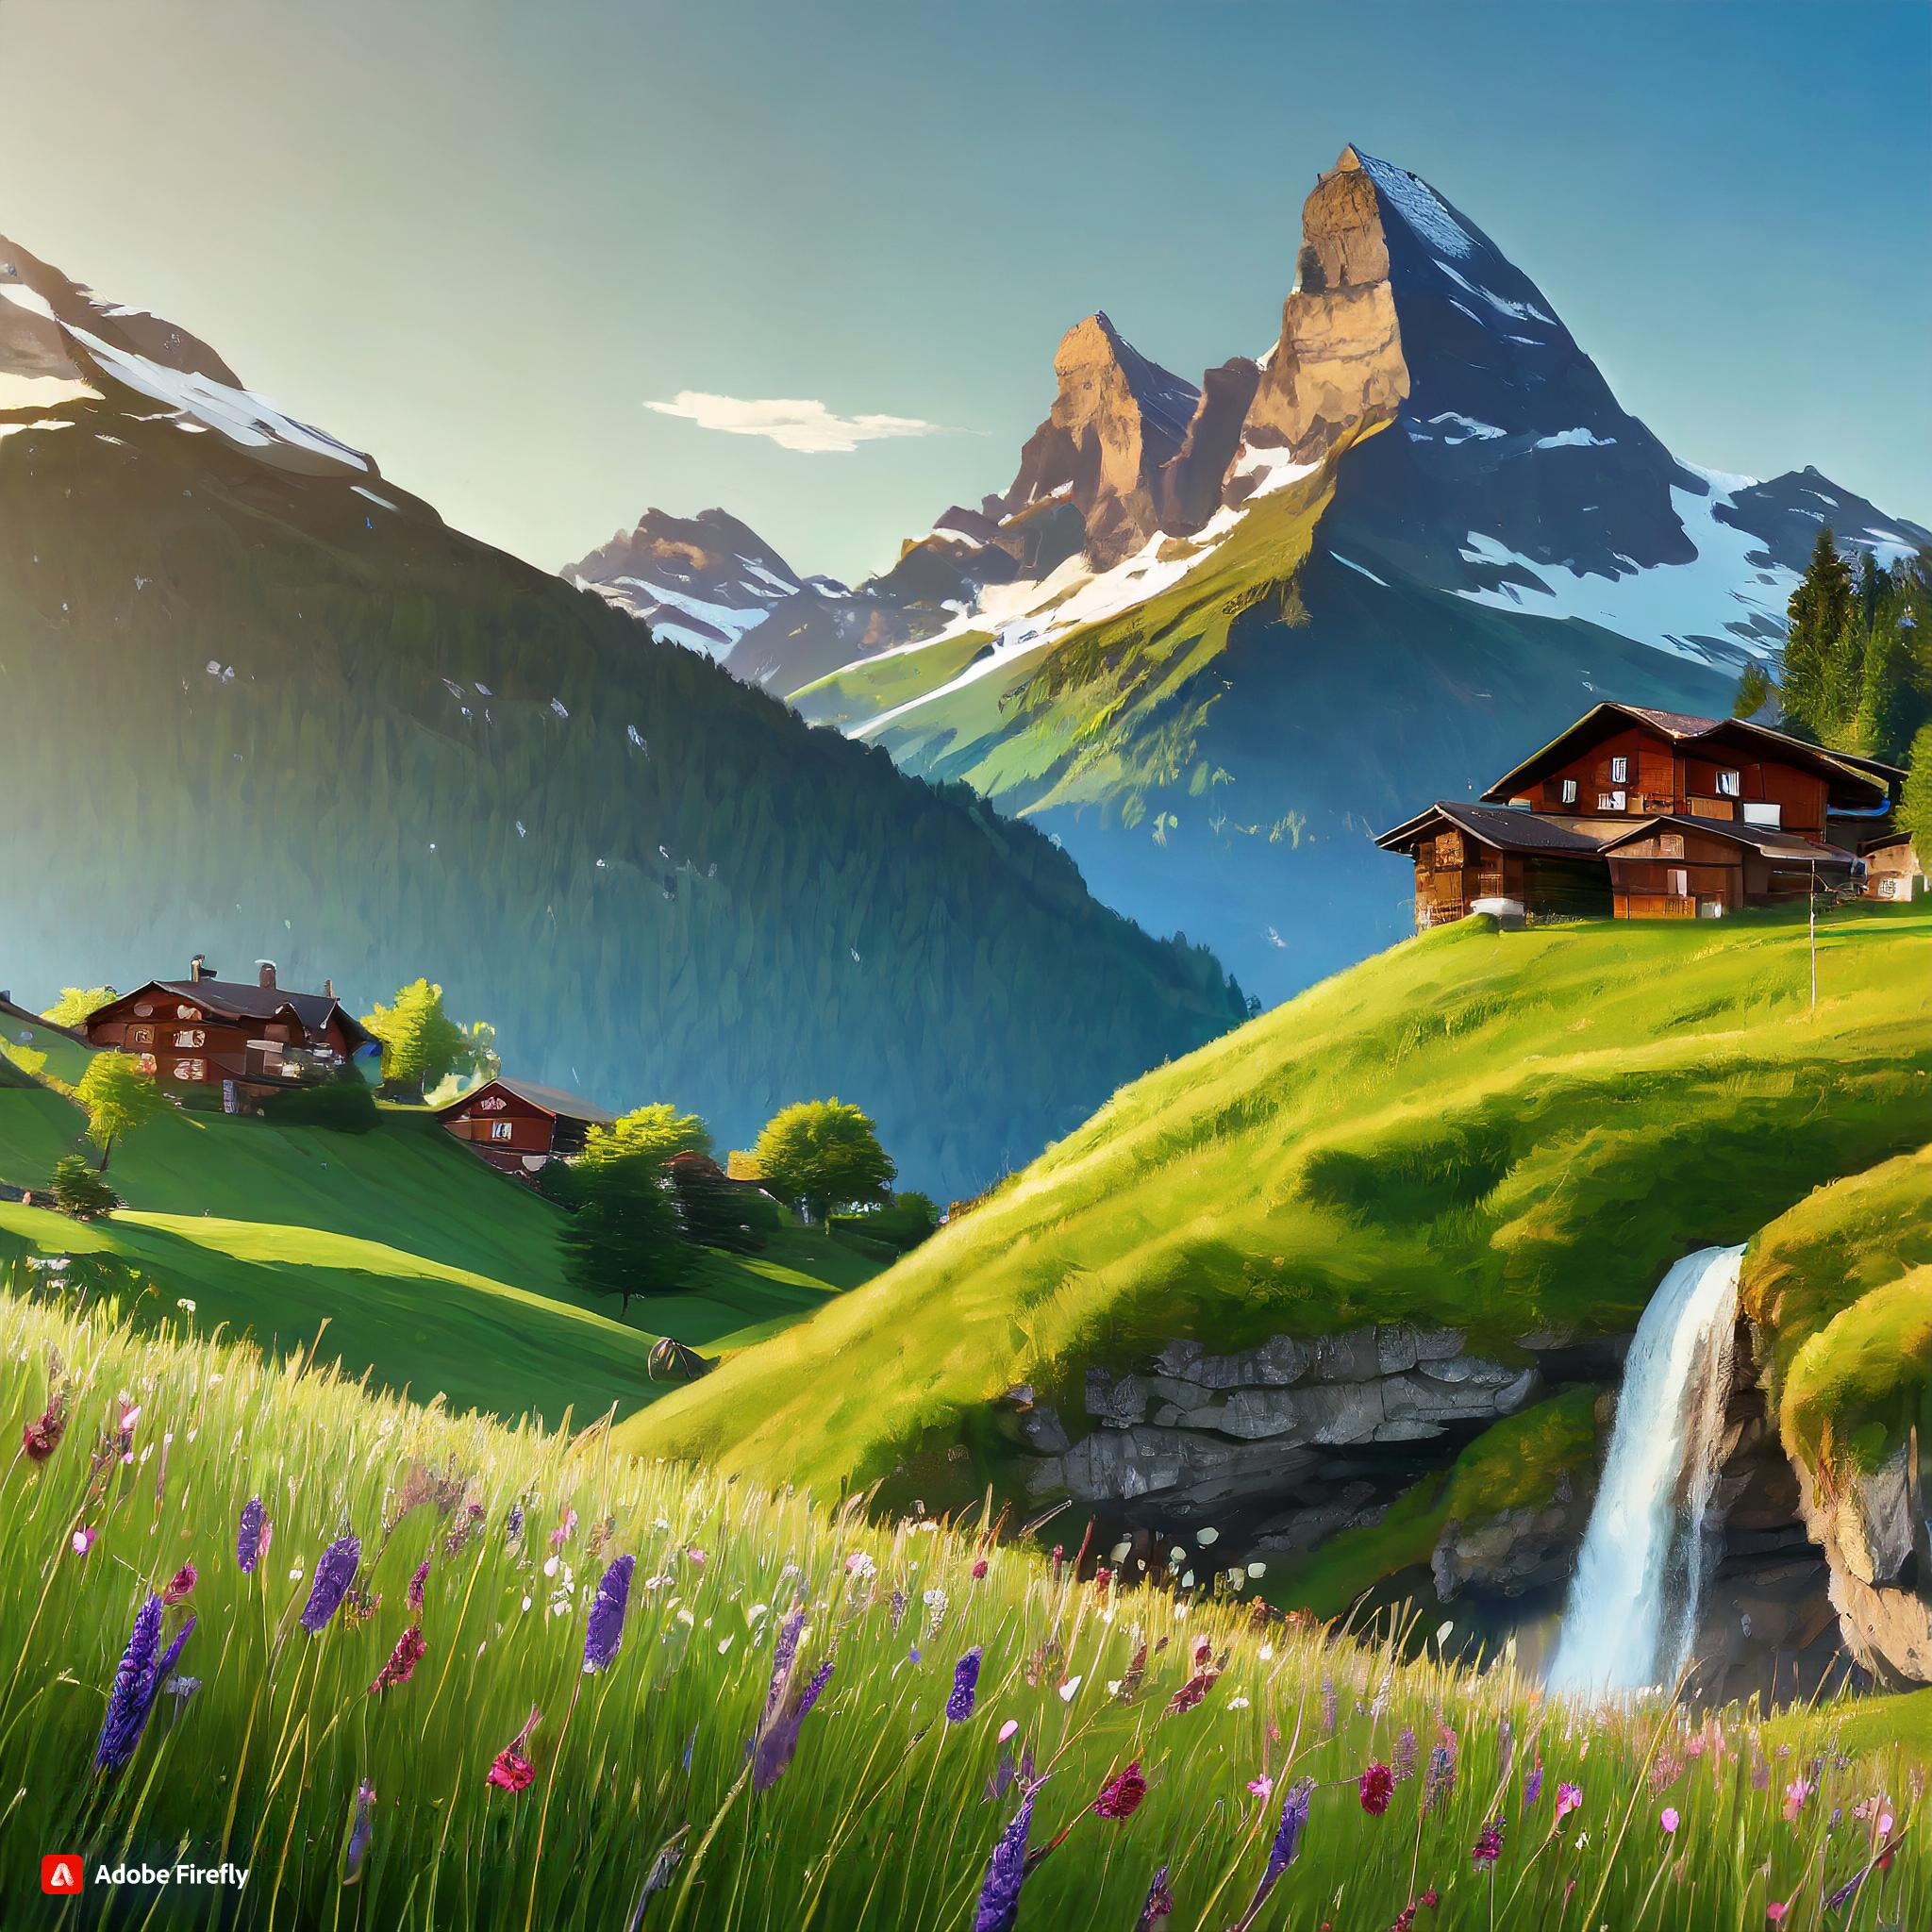  Firefly Eye-level view of the grass hills in Murren, Switzerland. Include the grass-topped mountains